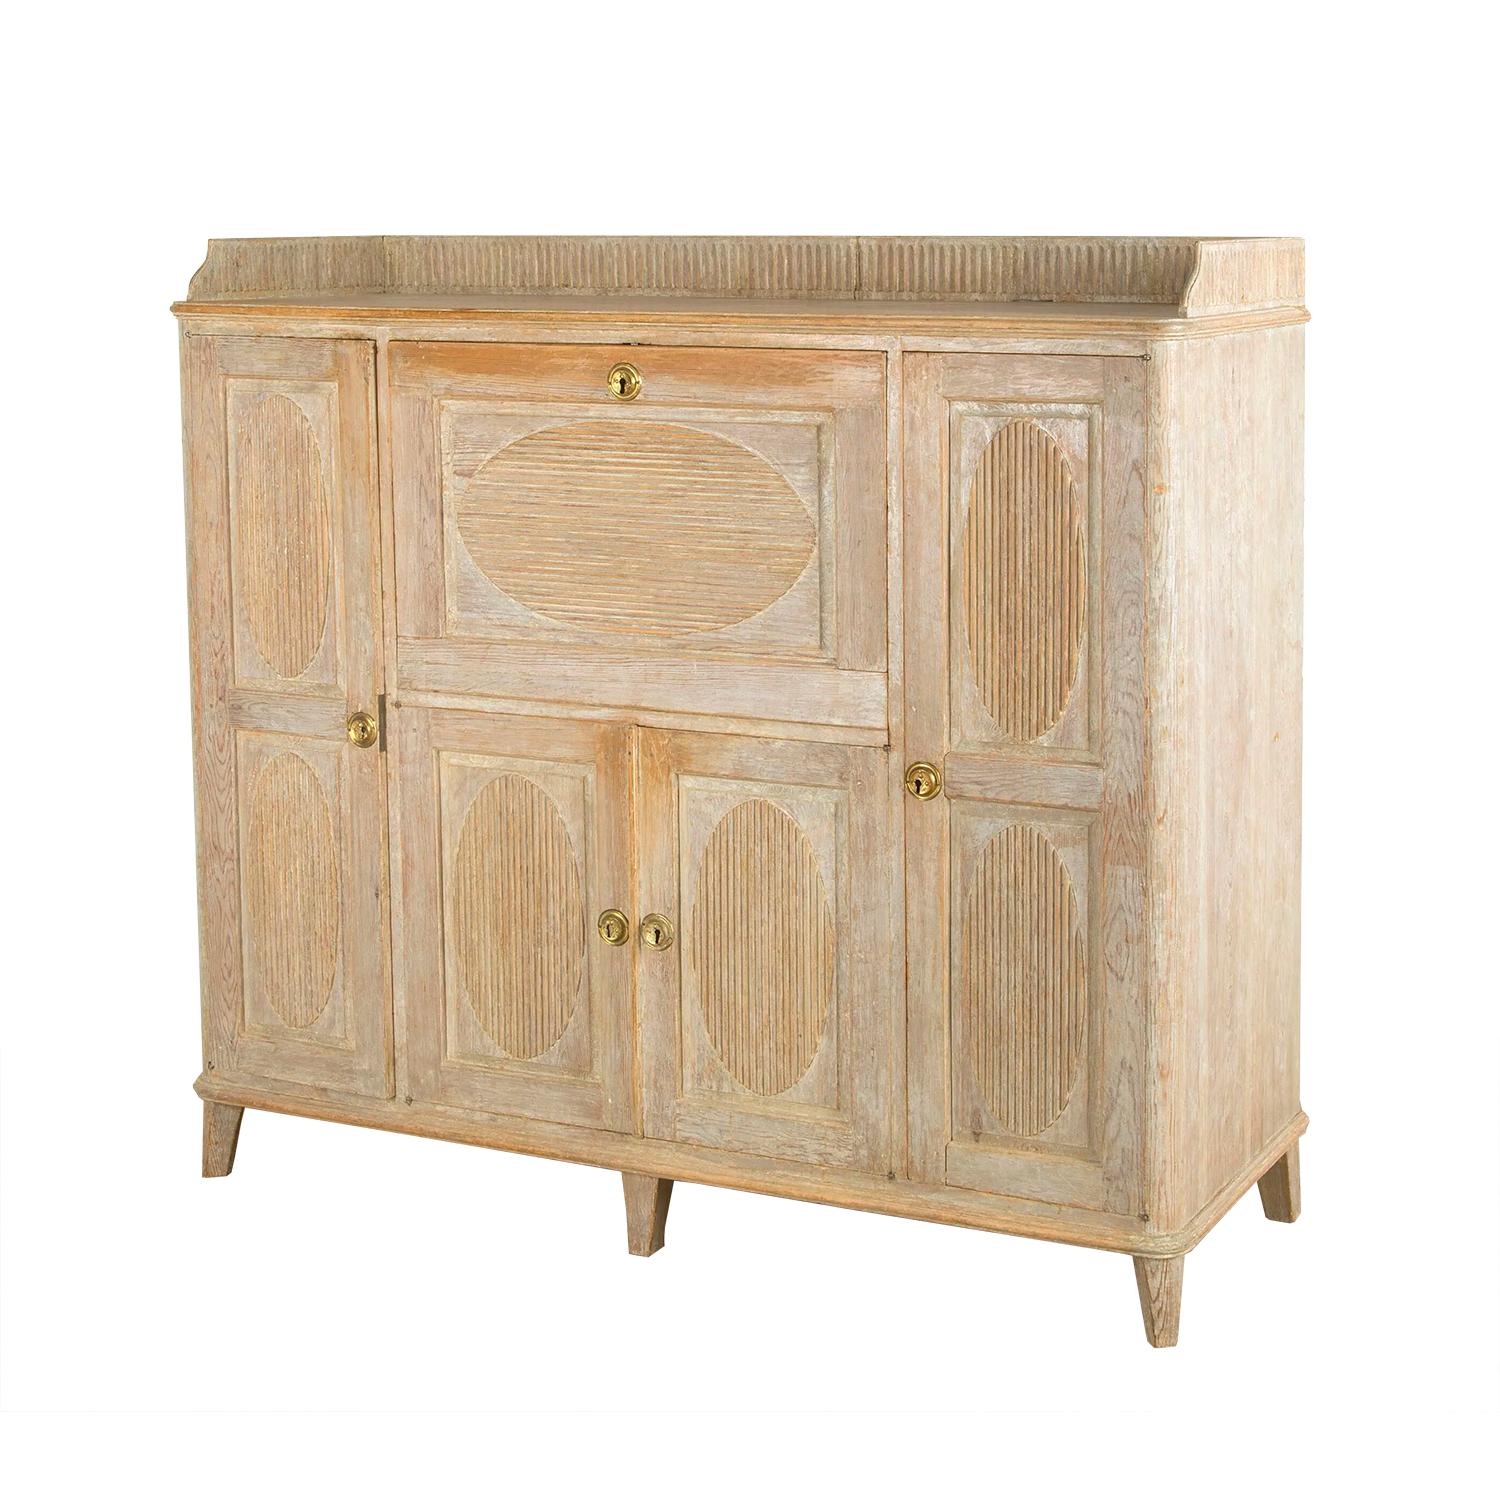 Swedish buffet from Skelleftea with a carved decorated gallery. Featuring a drop front door which opens to a useful desk, with two further long doors opening to storage space. A further two doors open to yet more shelving. 
This is a useful storage